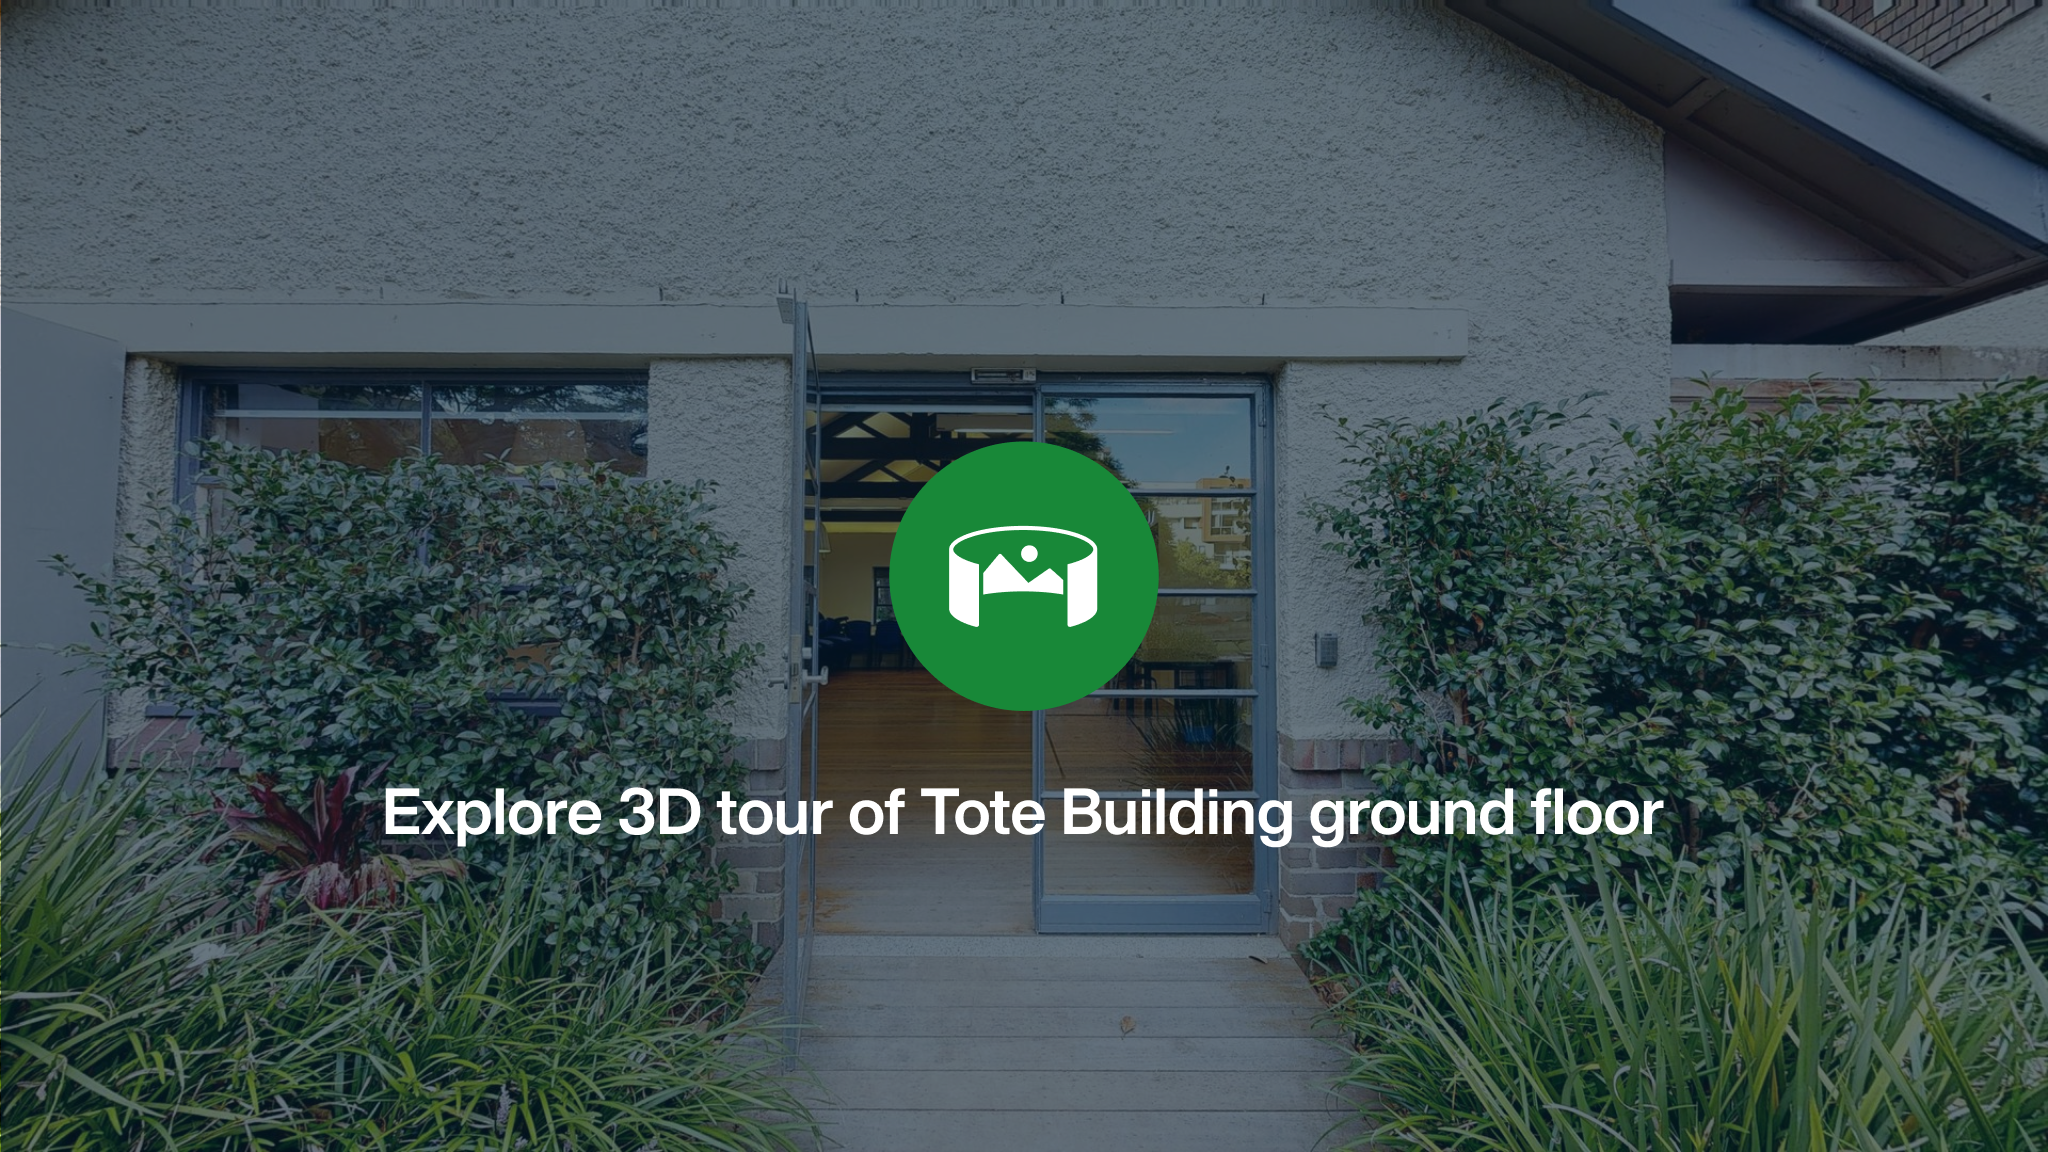 An exterior image of the Tote Building with an green icon and the words Explore 3D tour of Tote Building 